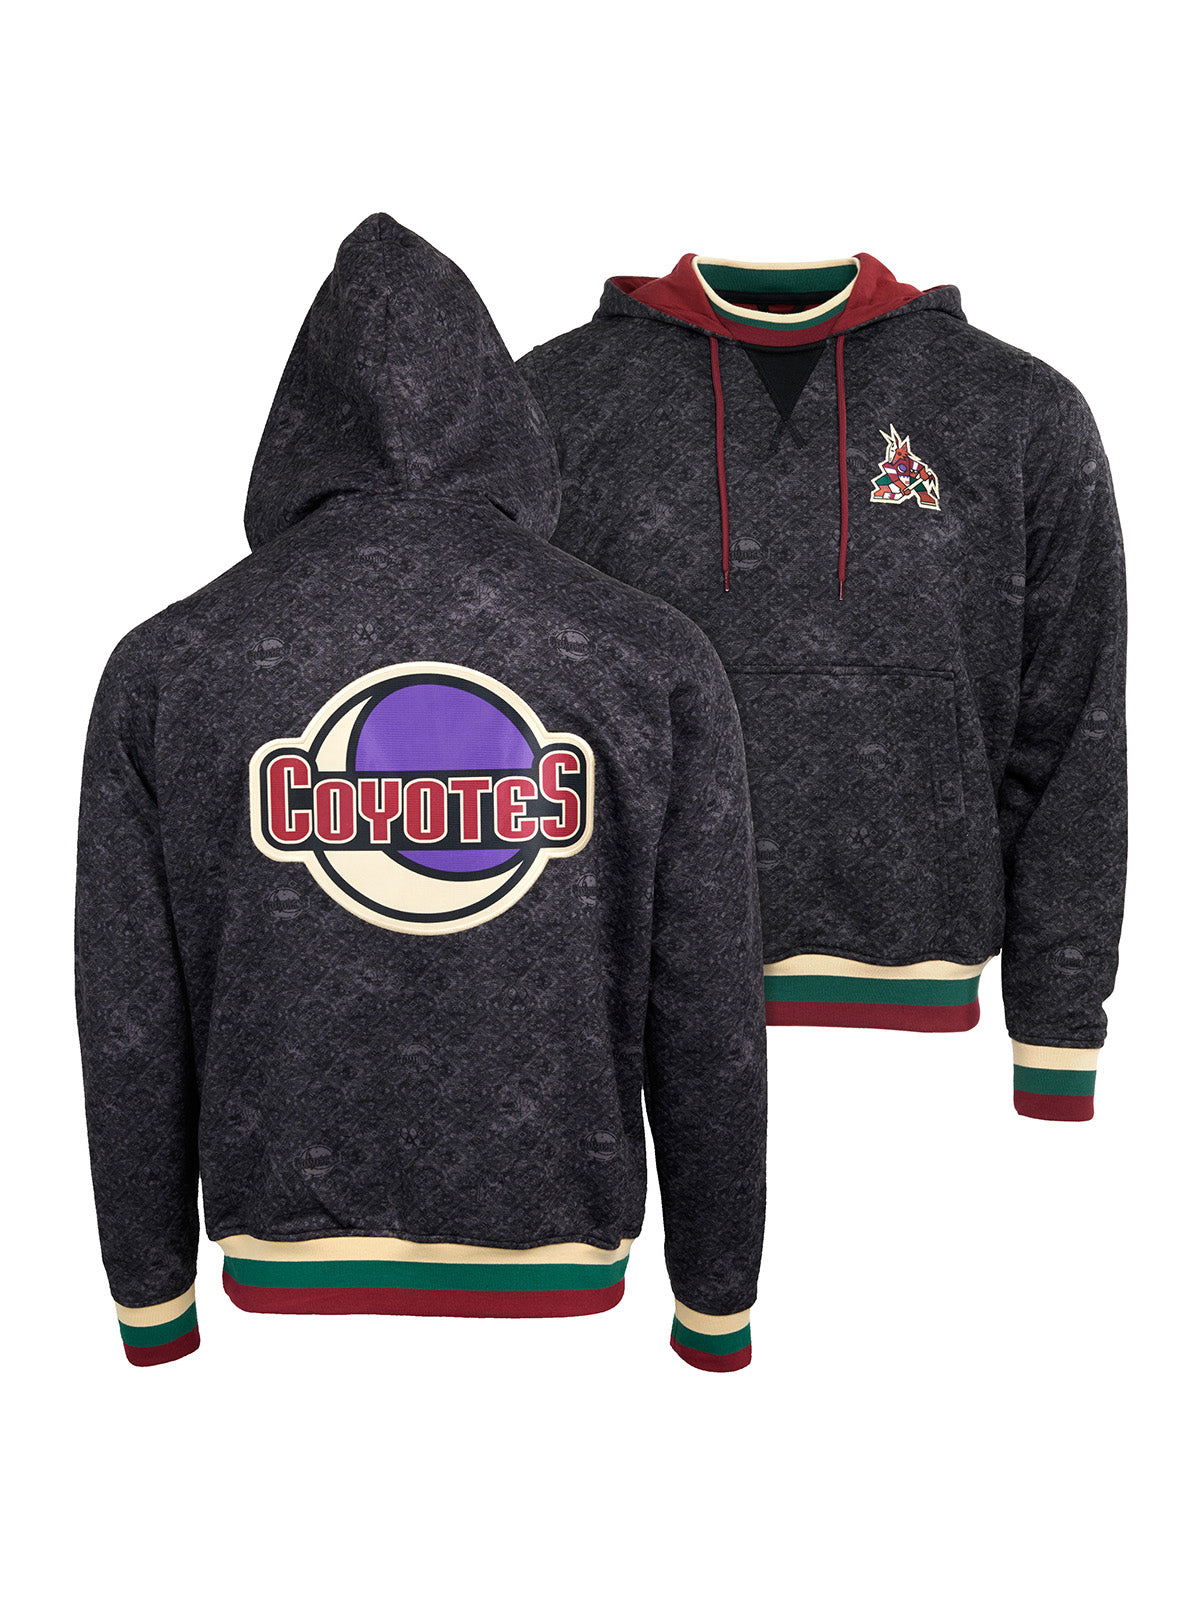 Arizona Coyotes Hoodie - Show your team spirit, with the iconic team logo patch on the front and back of the hoodie, and proudly display your Arizona Coyotes support in their team colors with this NHL hockey hoodie.